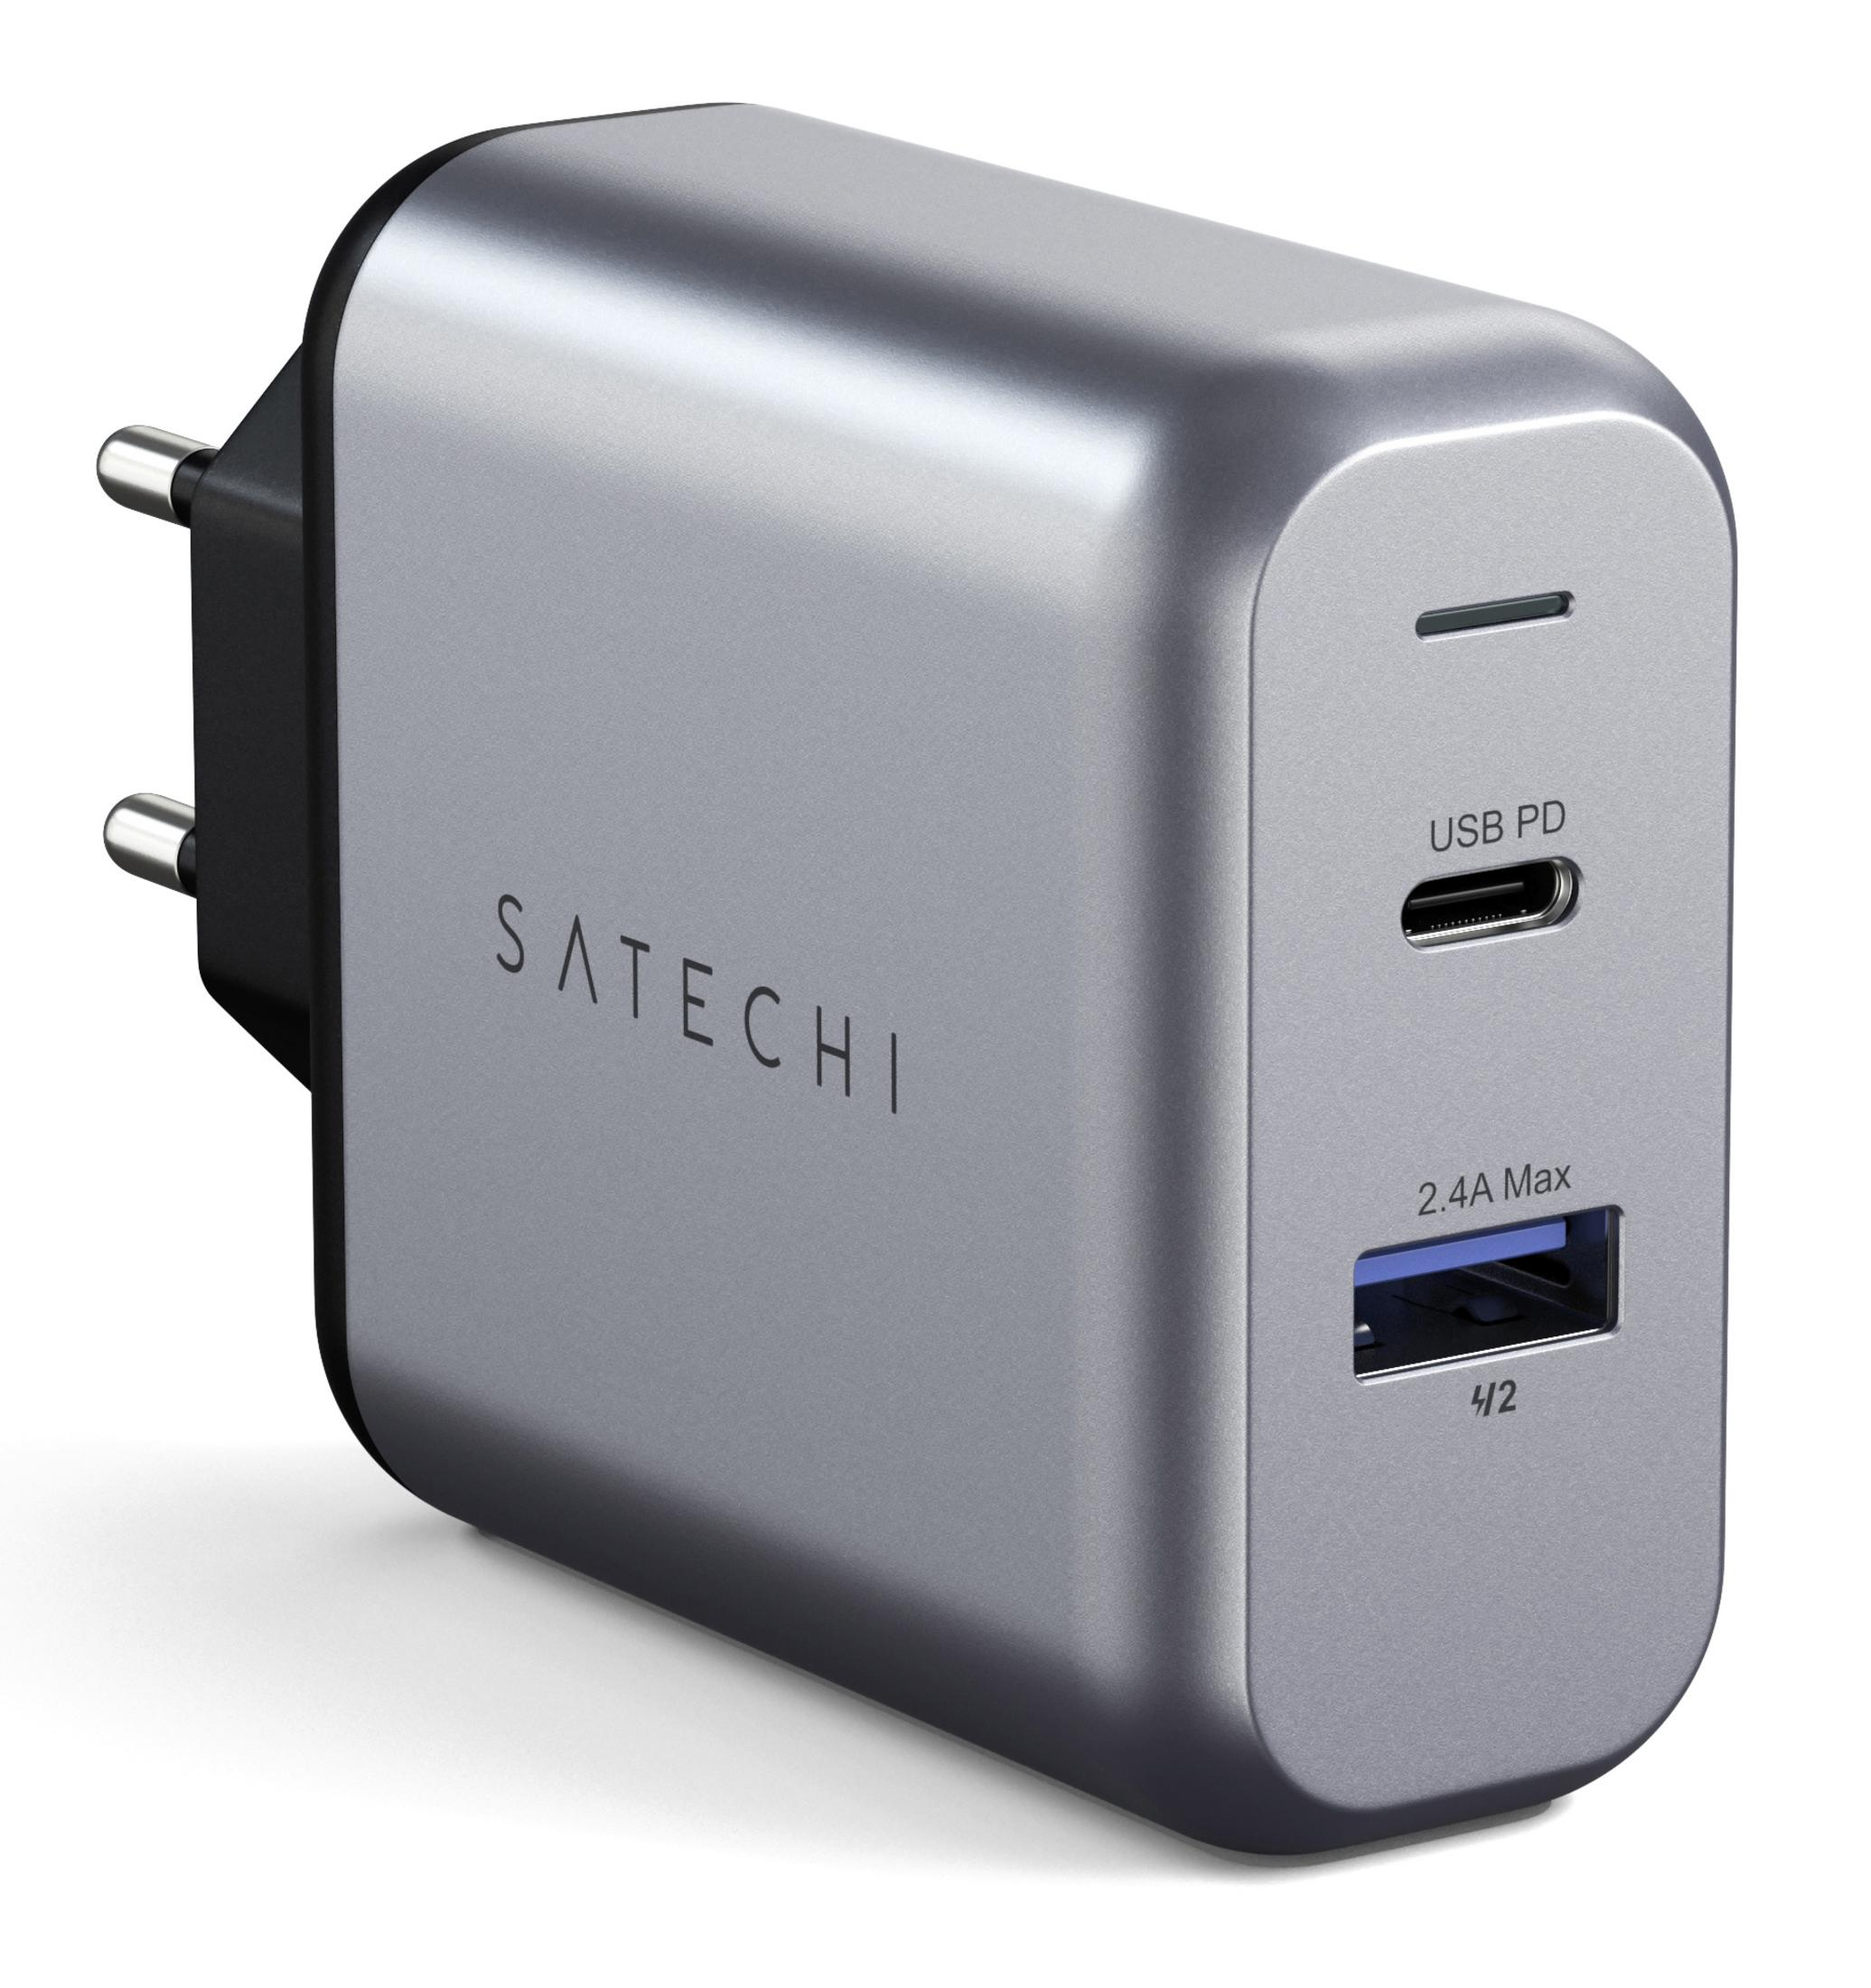 GRAY ST-MCCAM-EU PORT WALL 30W Ladegerät SATECHI DUAL CHARGER SPACE